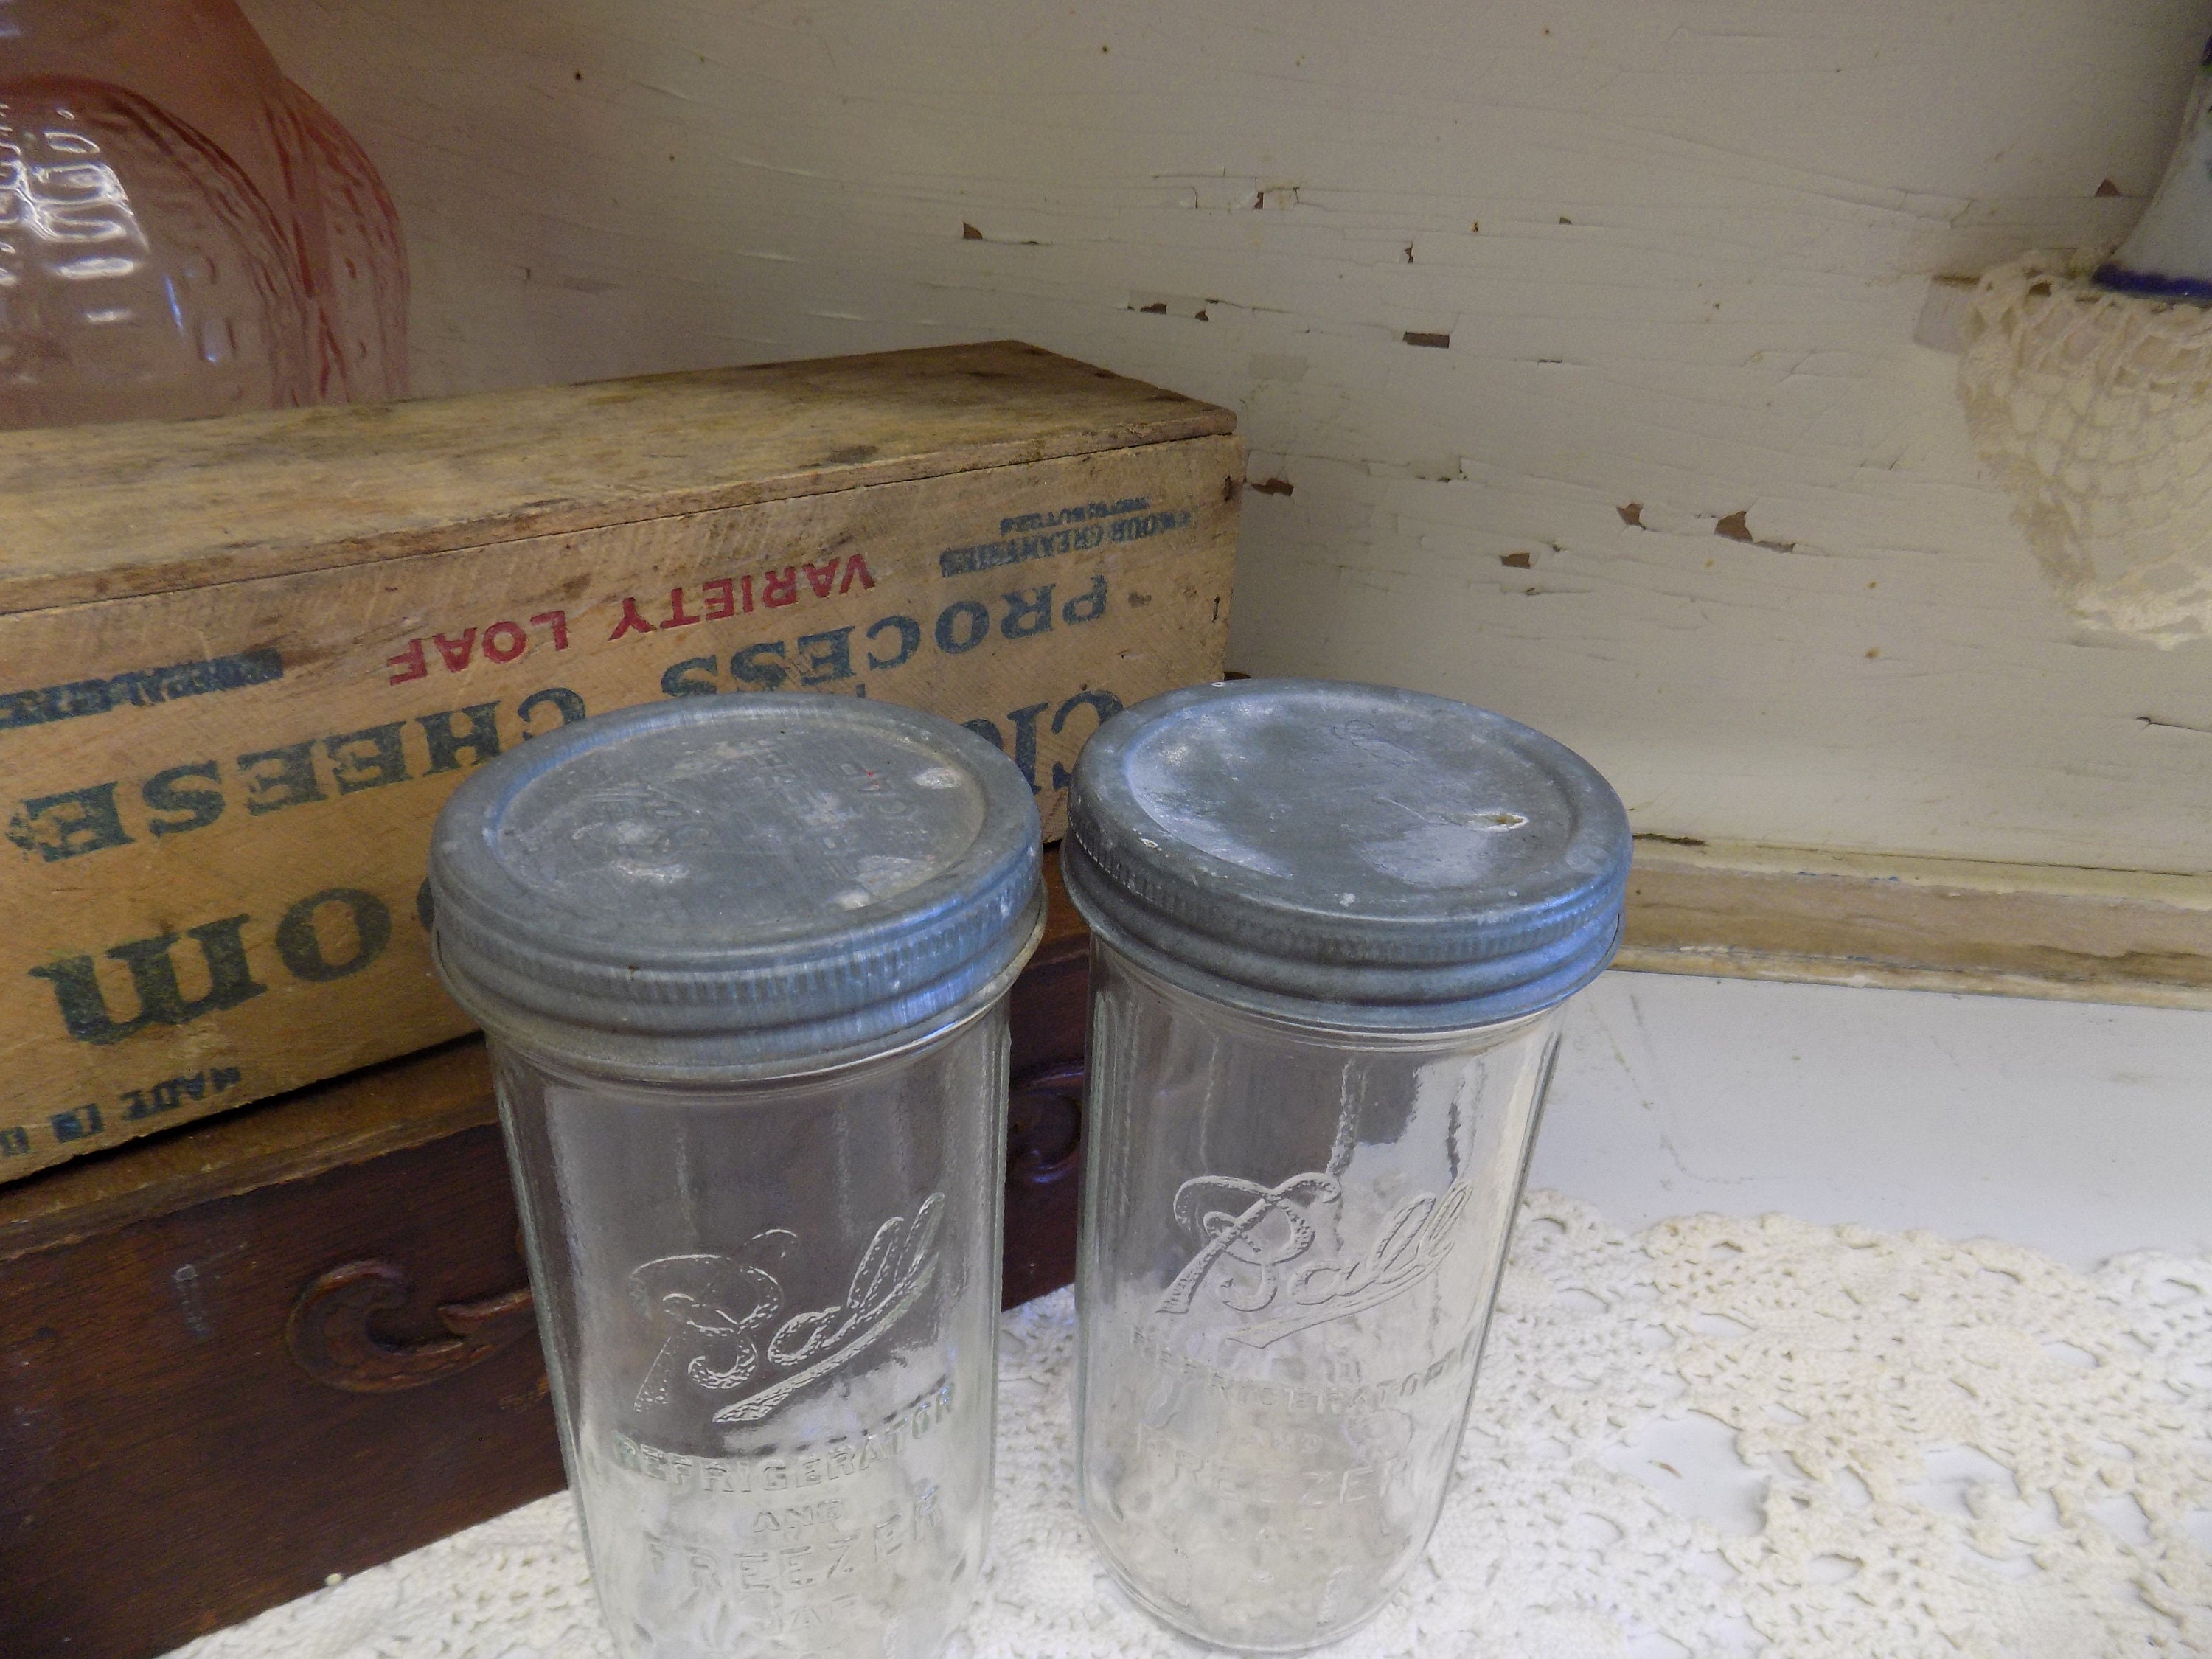 2 Ball Freezer Jars Clear 1 Pint Sized 1 Pint and Half Sized With Zinc Freezer  Caps Vintage Canning B334 